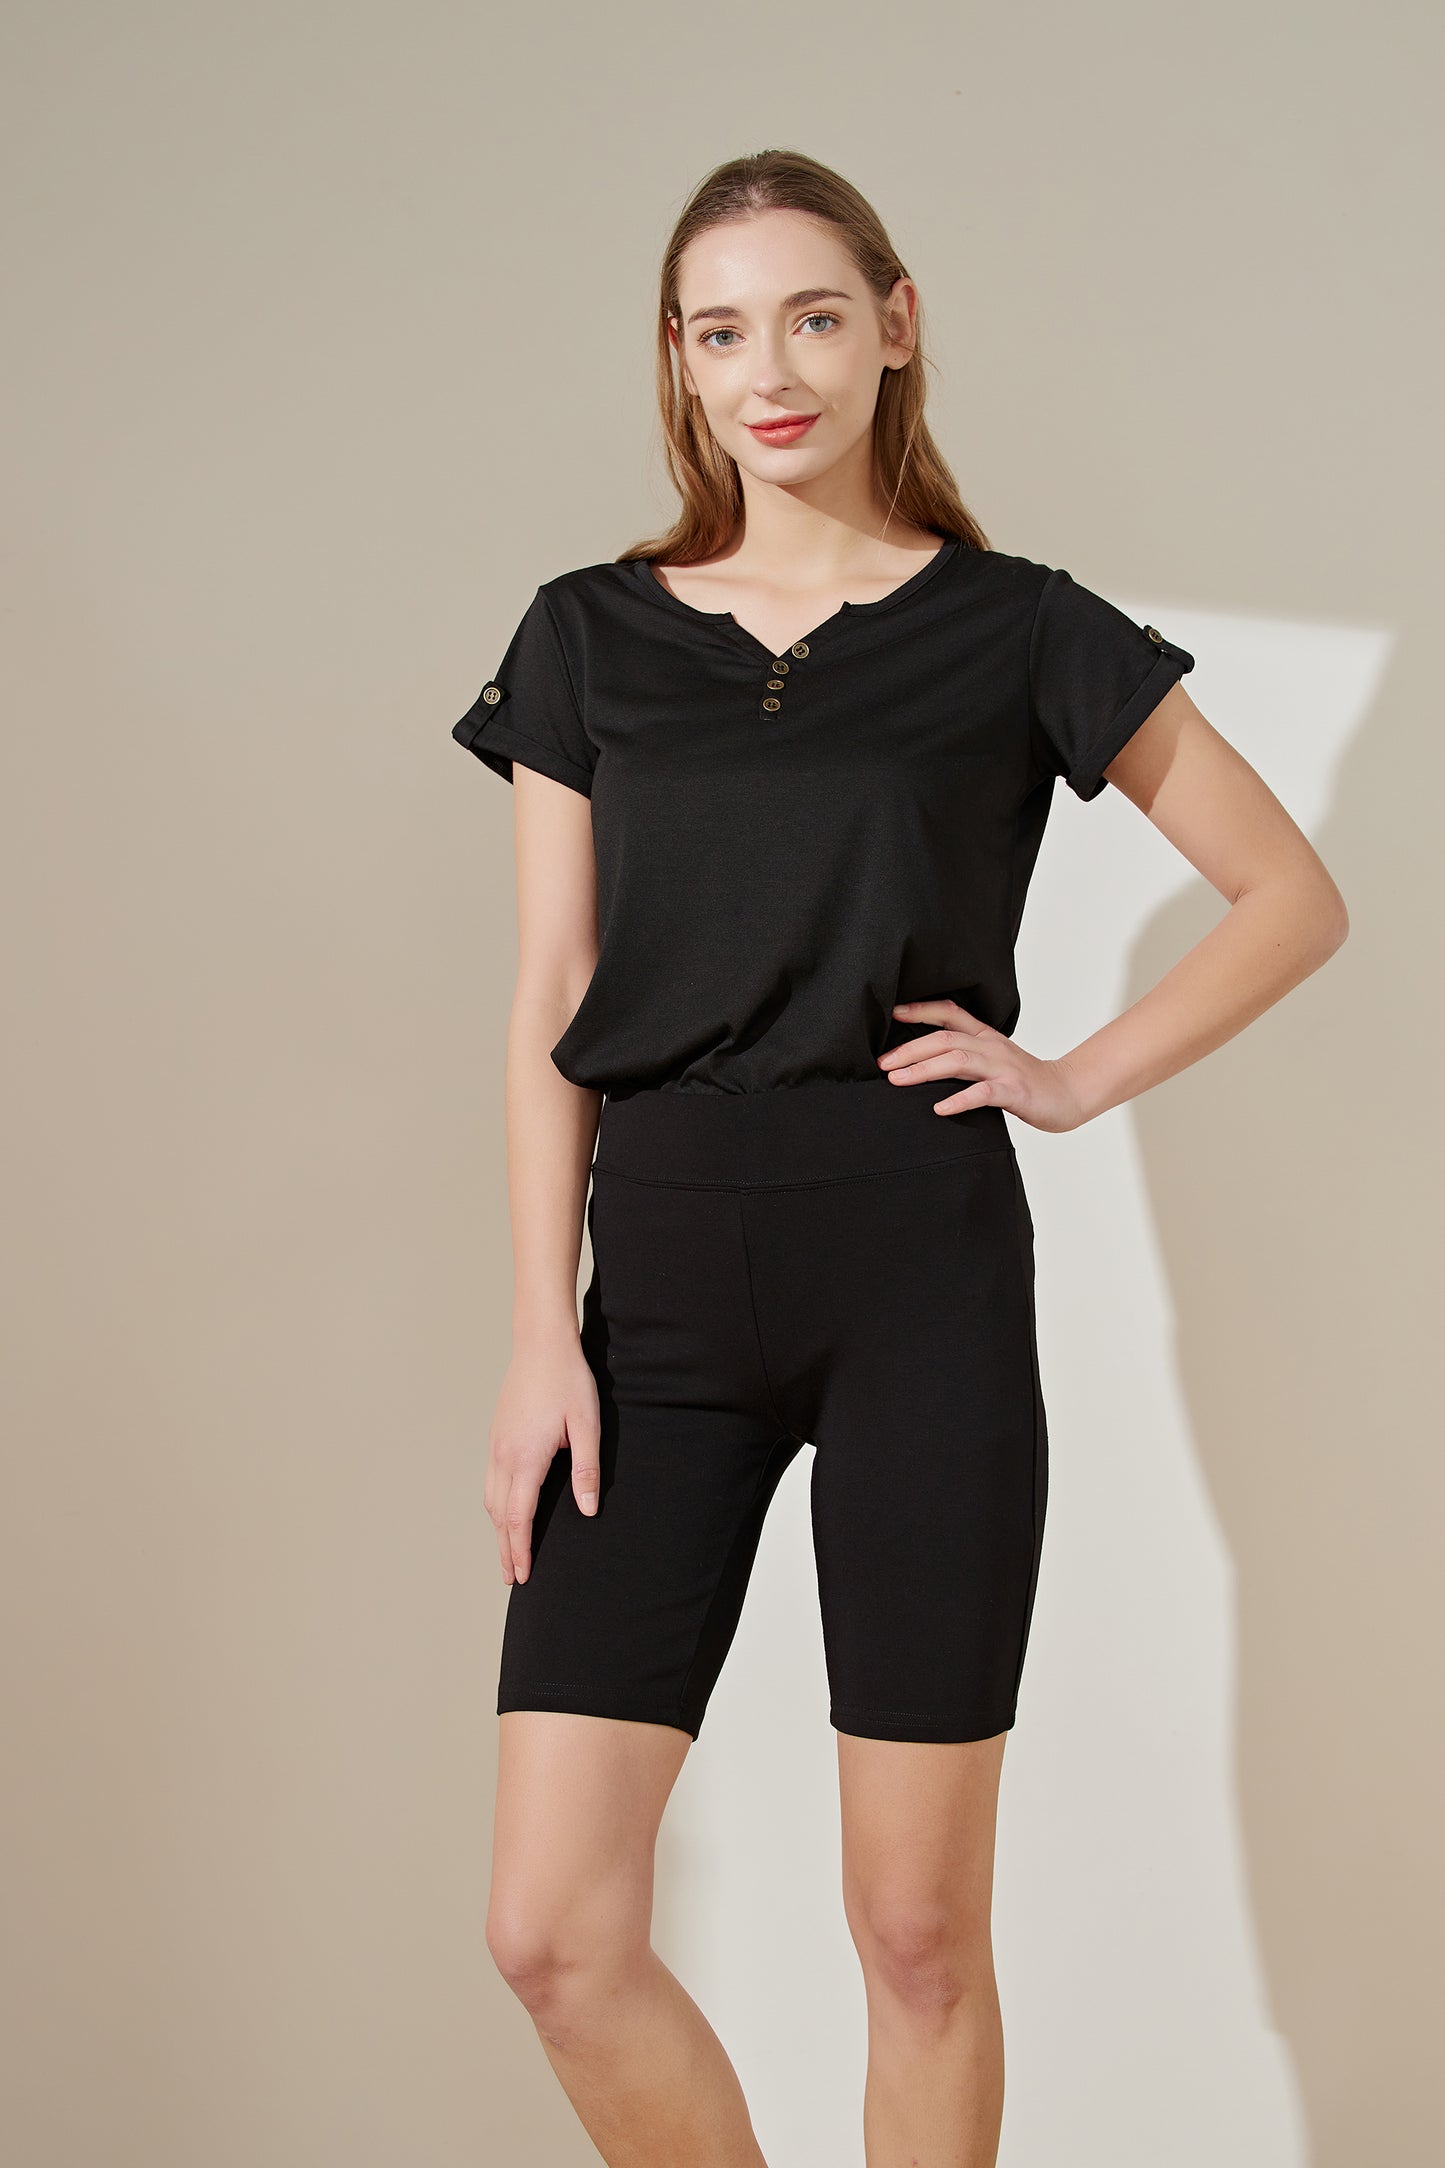 Plus size - short sleeve shirt with Button front neck and button on turned cuff